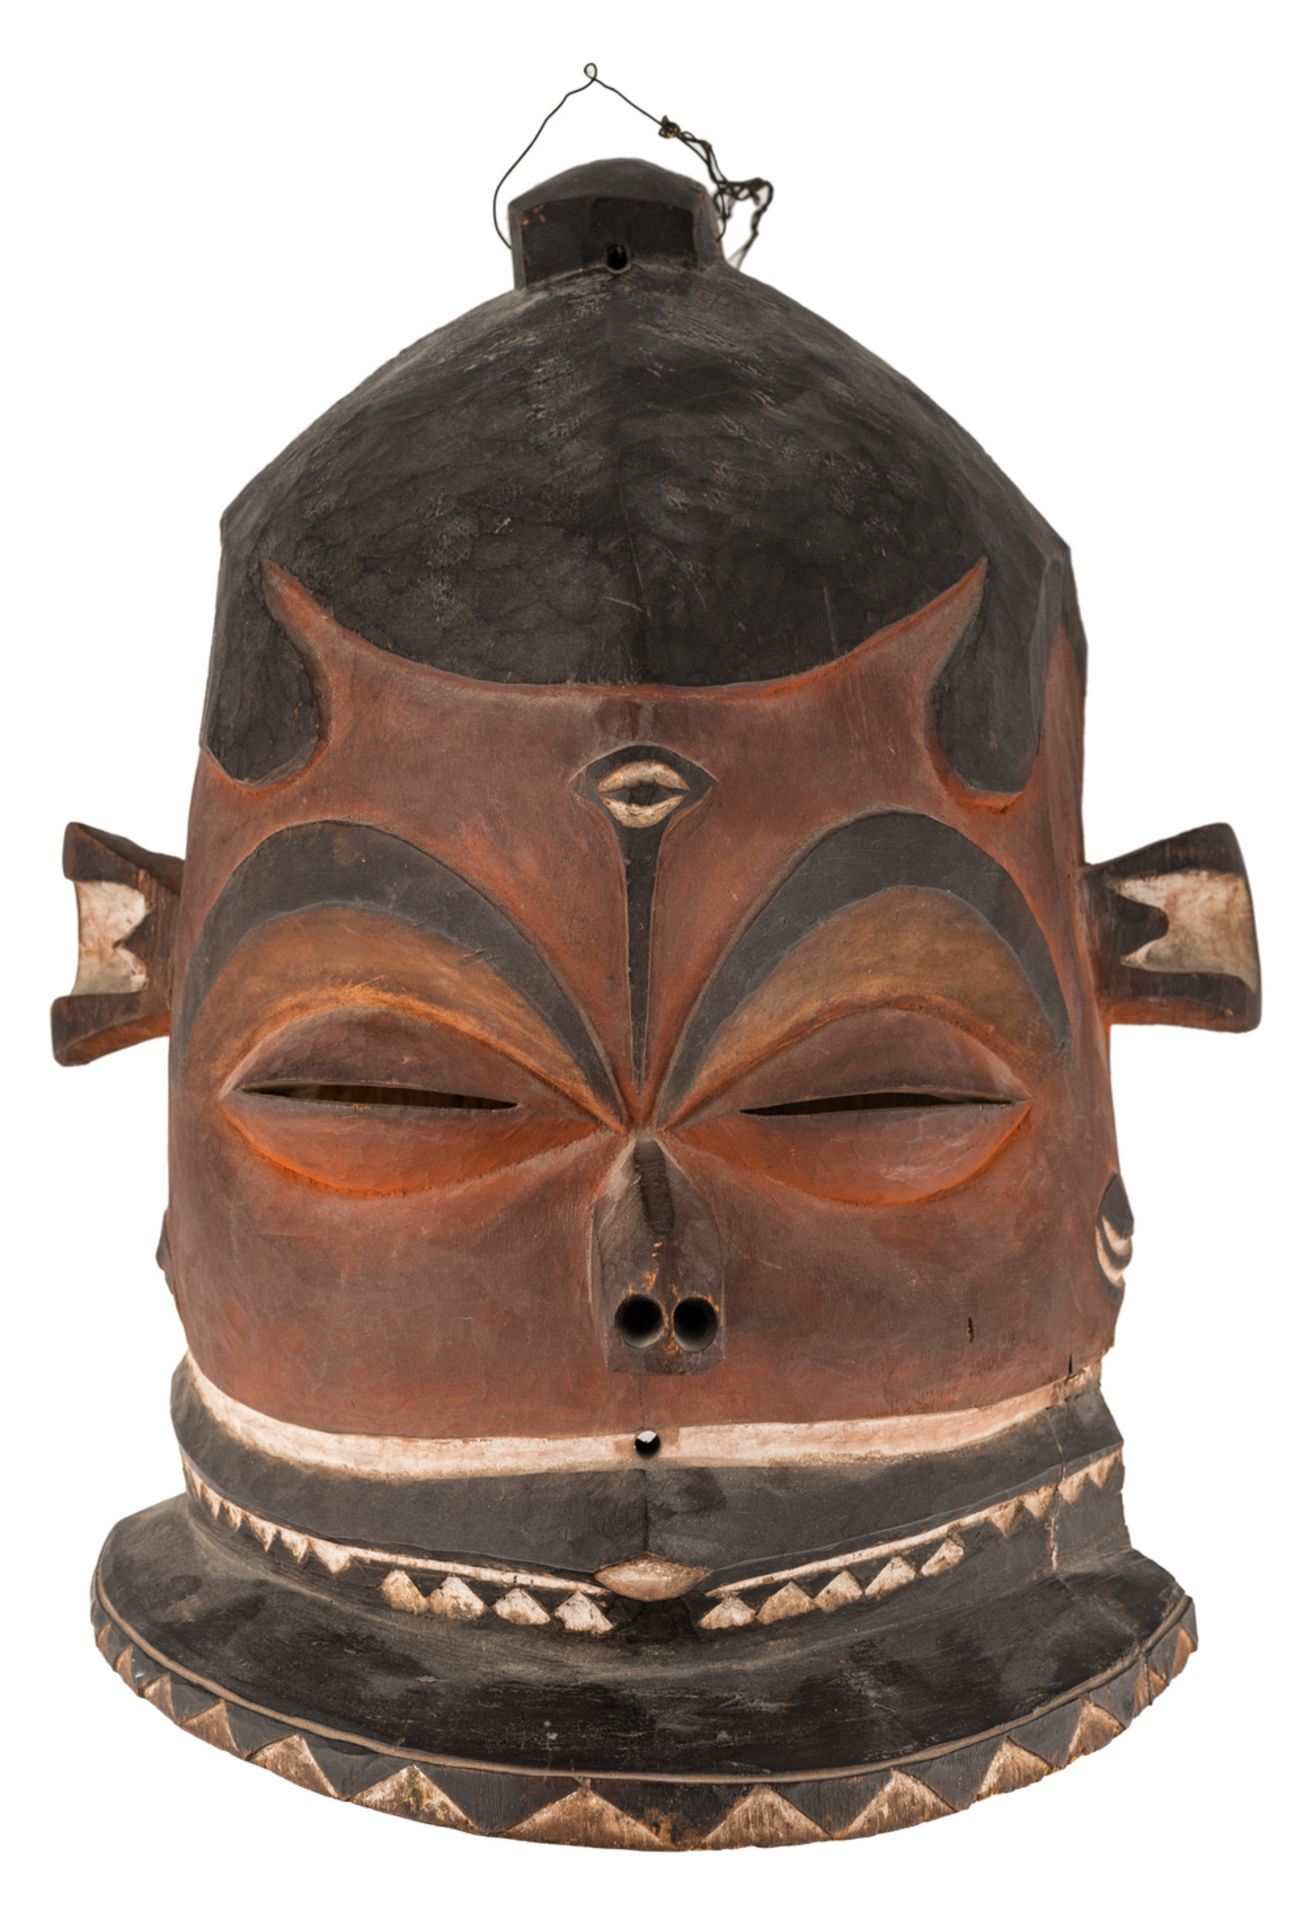 A traditional African polychrome decorated wooden mask, Pende - Congo, H 31,5 cm